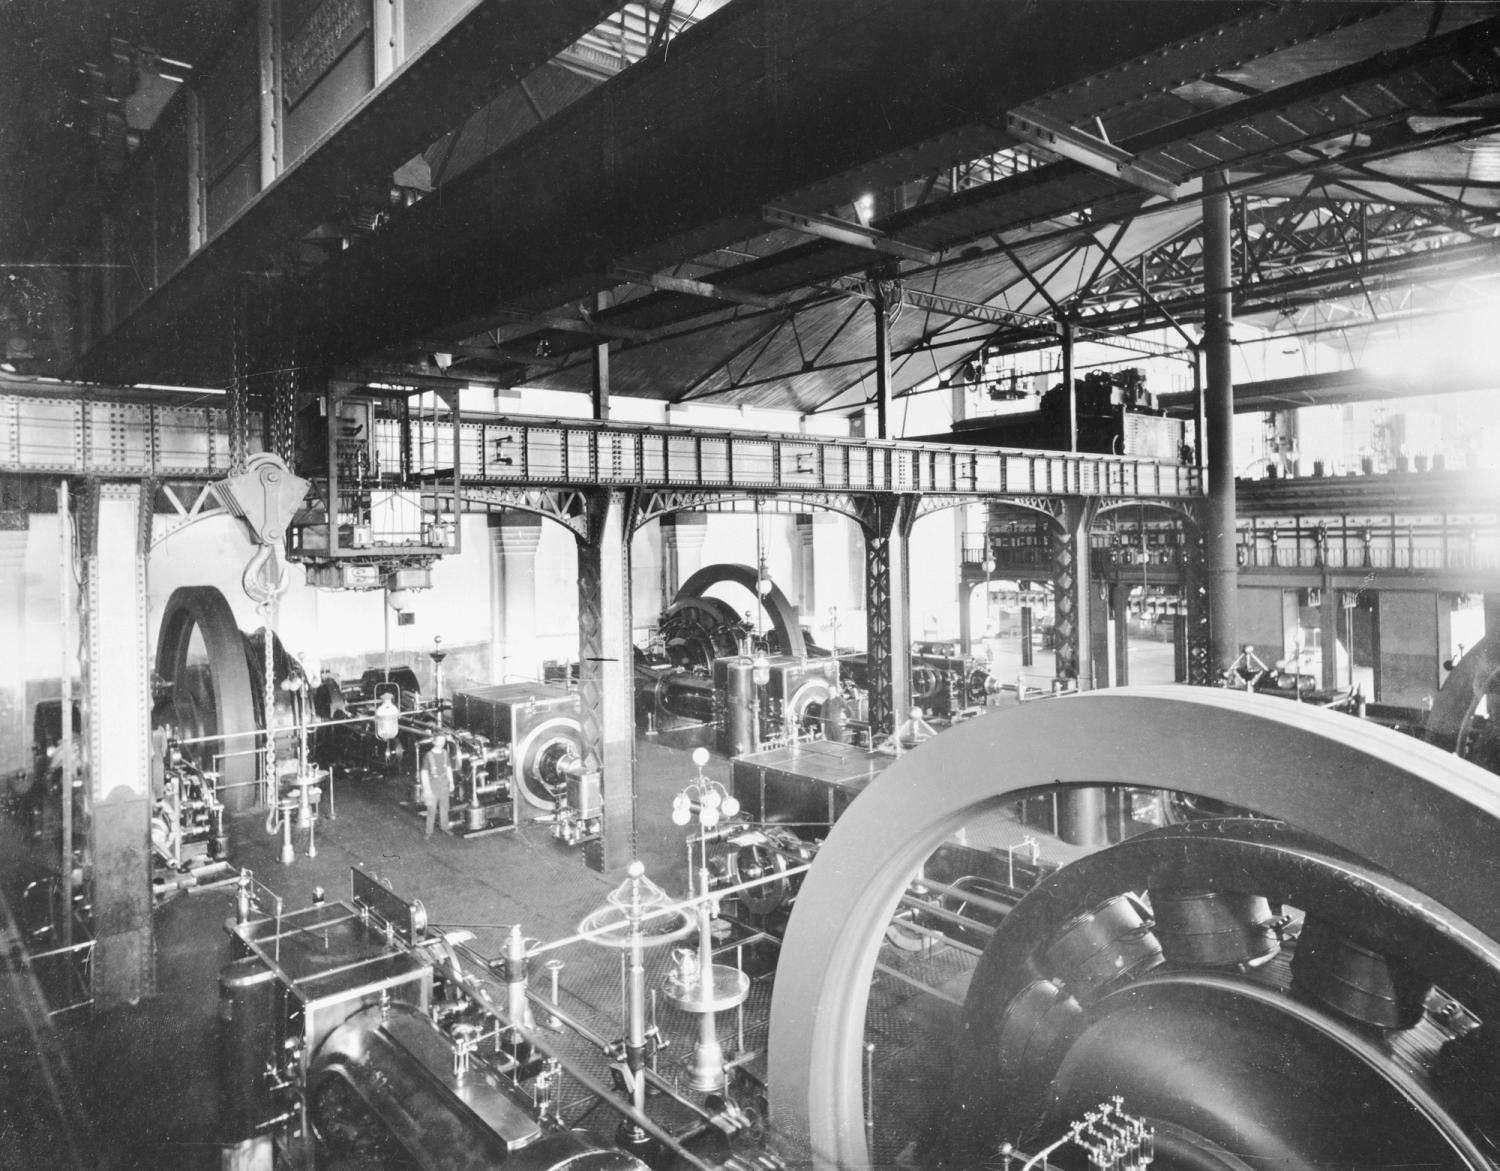 Black and white archival image of the Power House with machinery whirling and gantry system